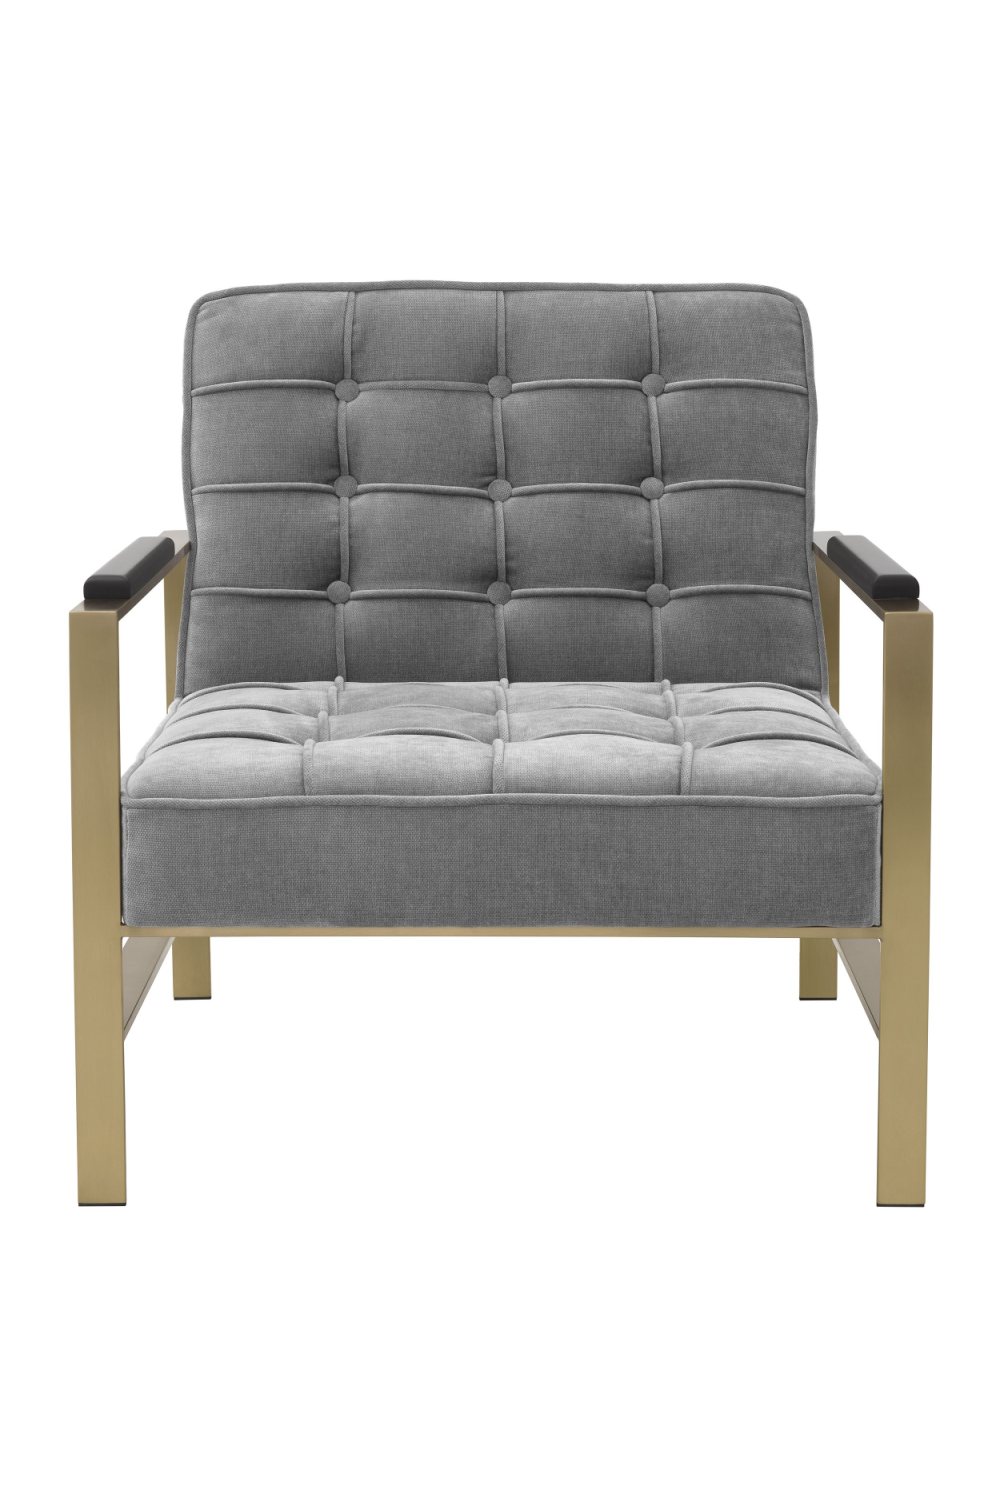 Gray Upholstered Accent Chair | Eichholtz Ernesto | Oroa.com